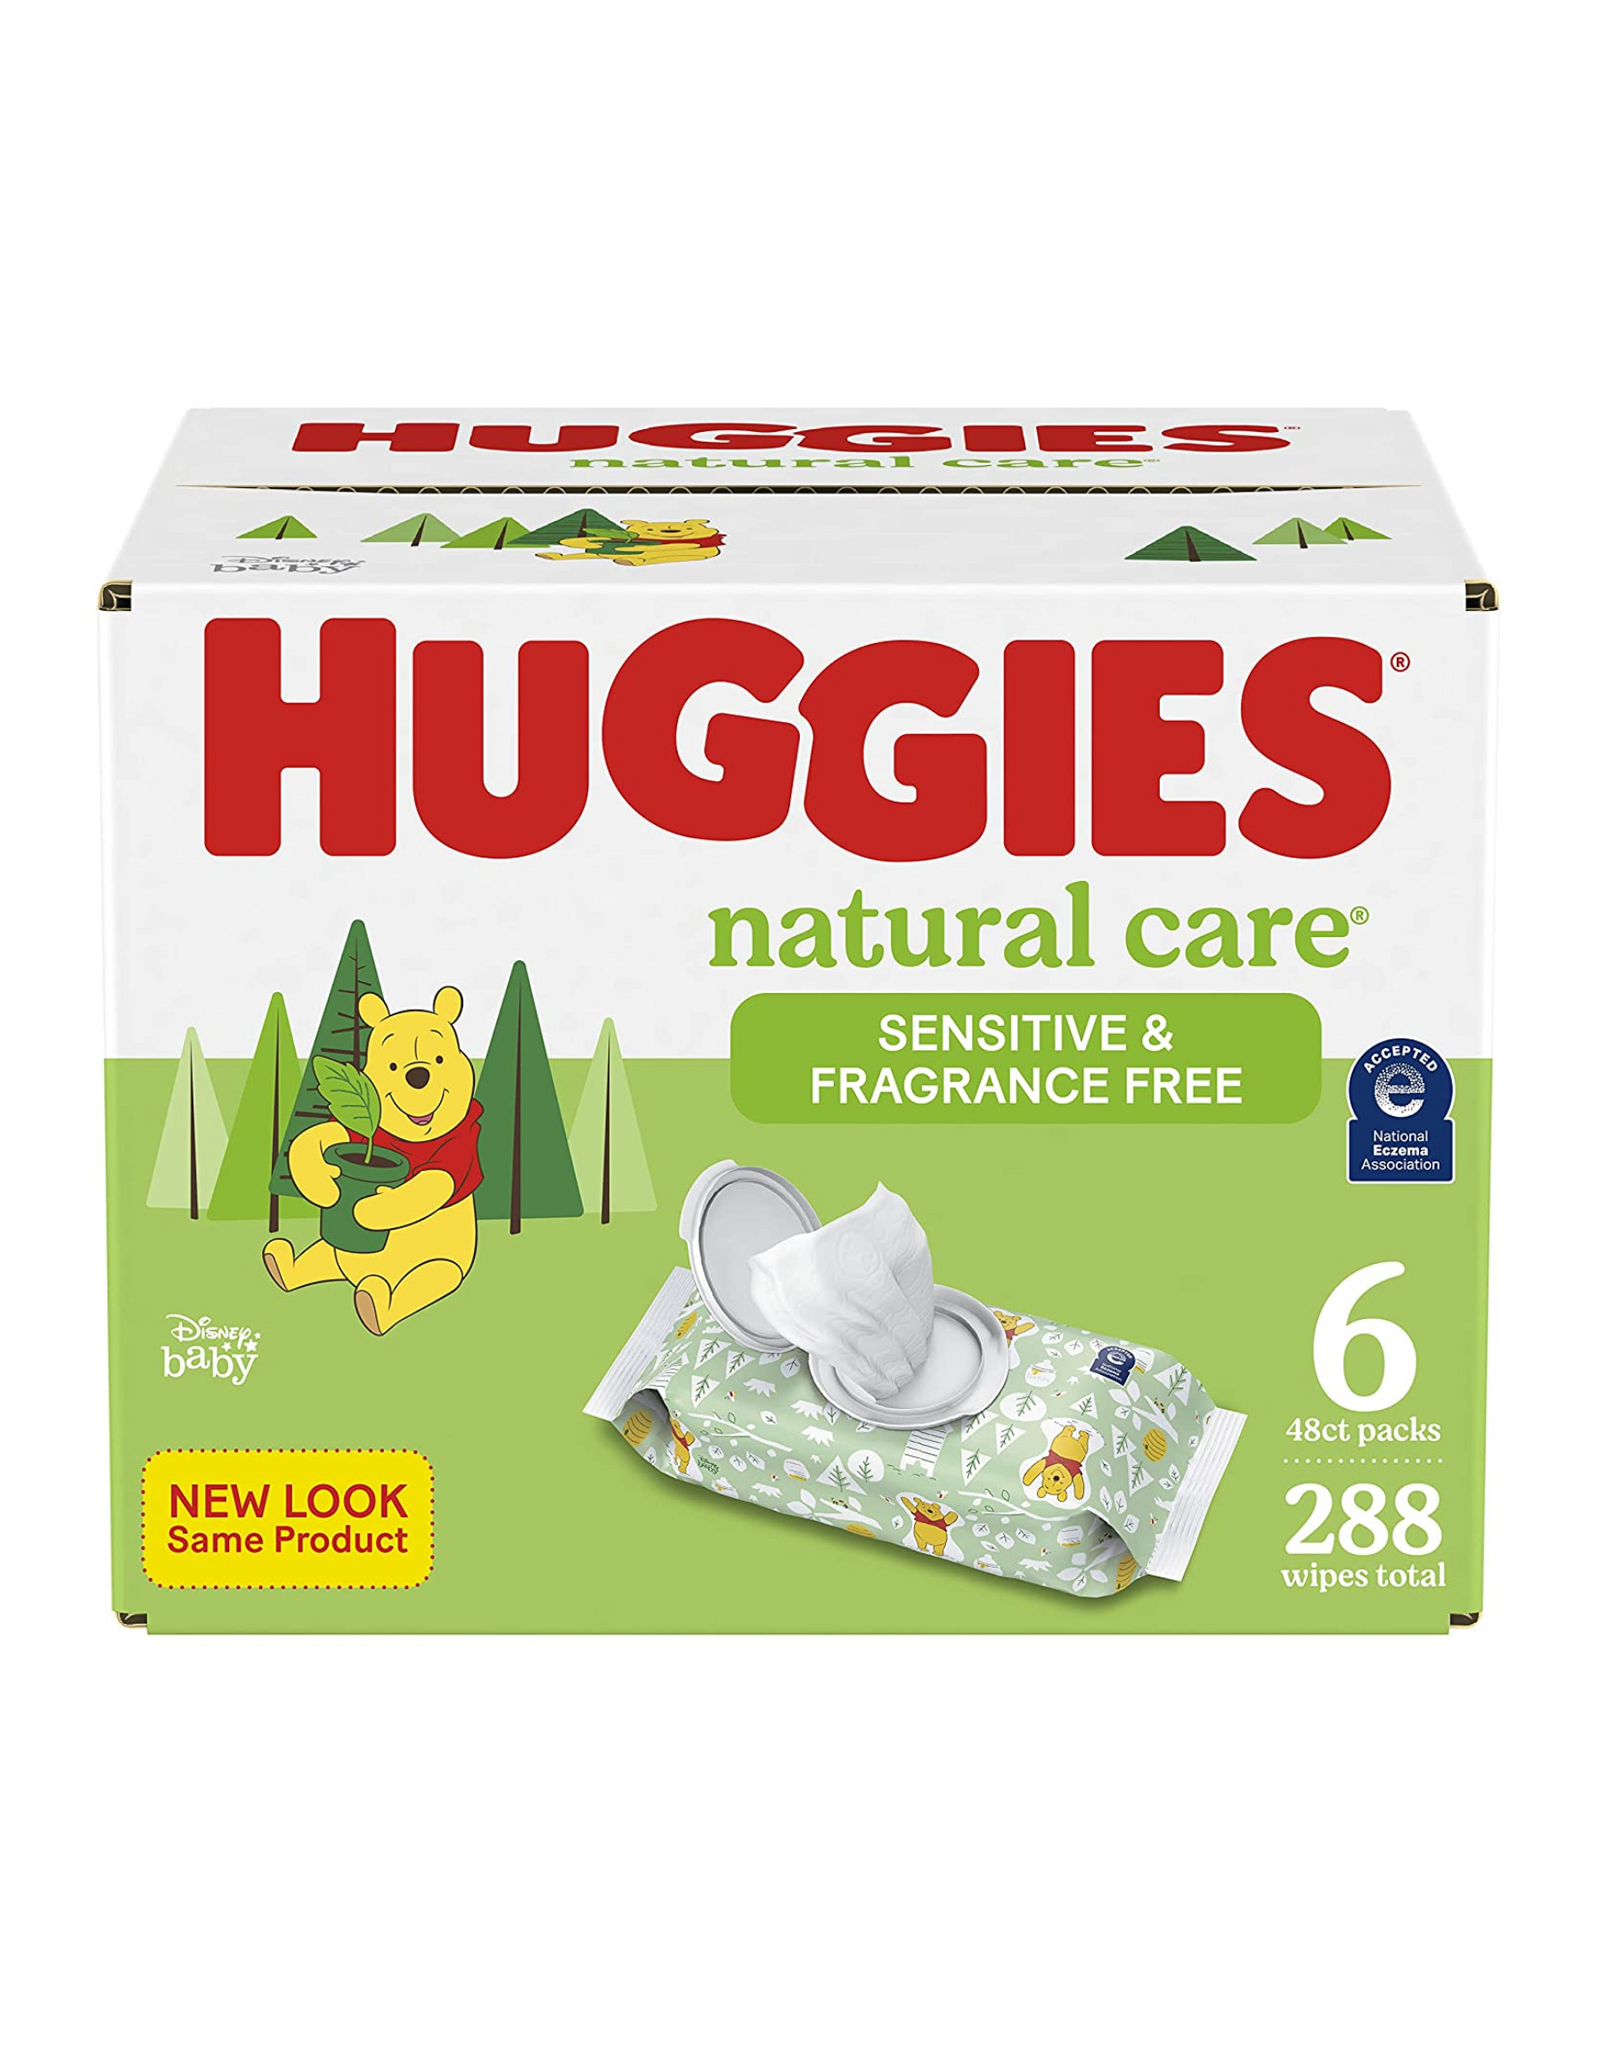 Baby Wipes, Huggies Natural Care Sensitive & Fragrance Free, 288 Wipes Total (6 Packs)